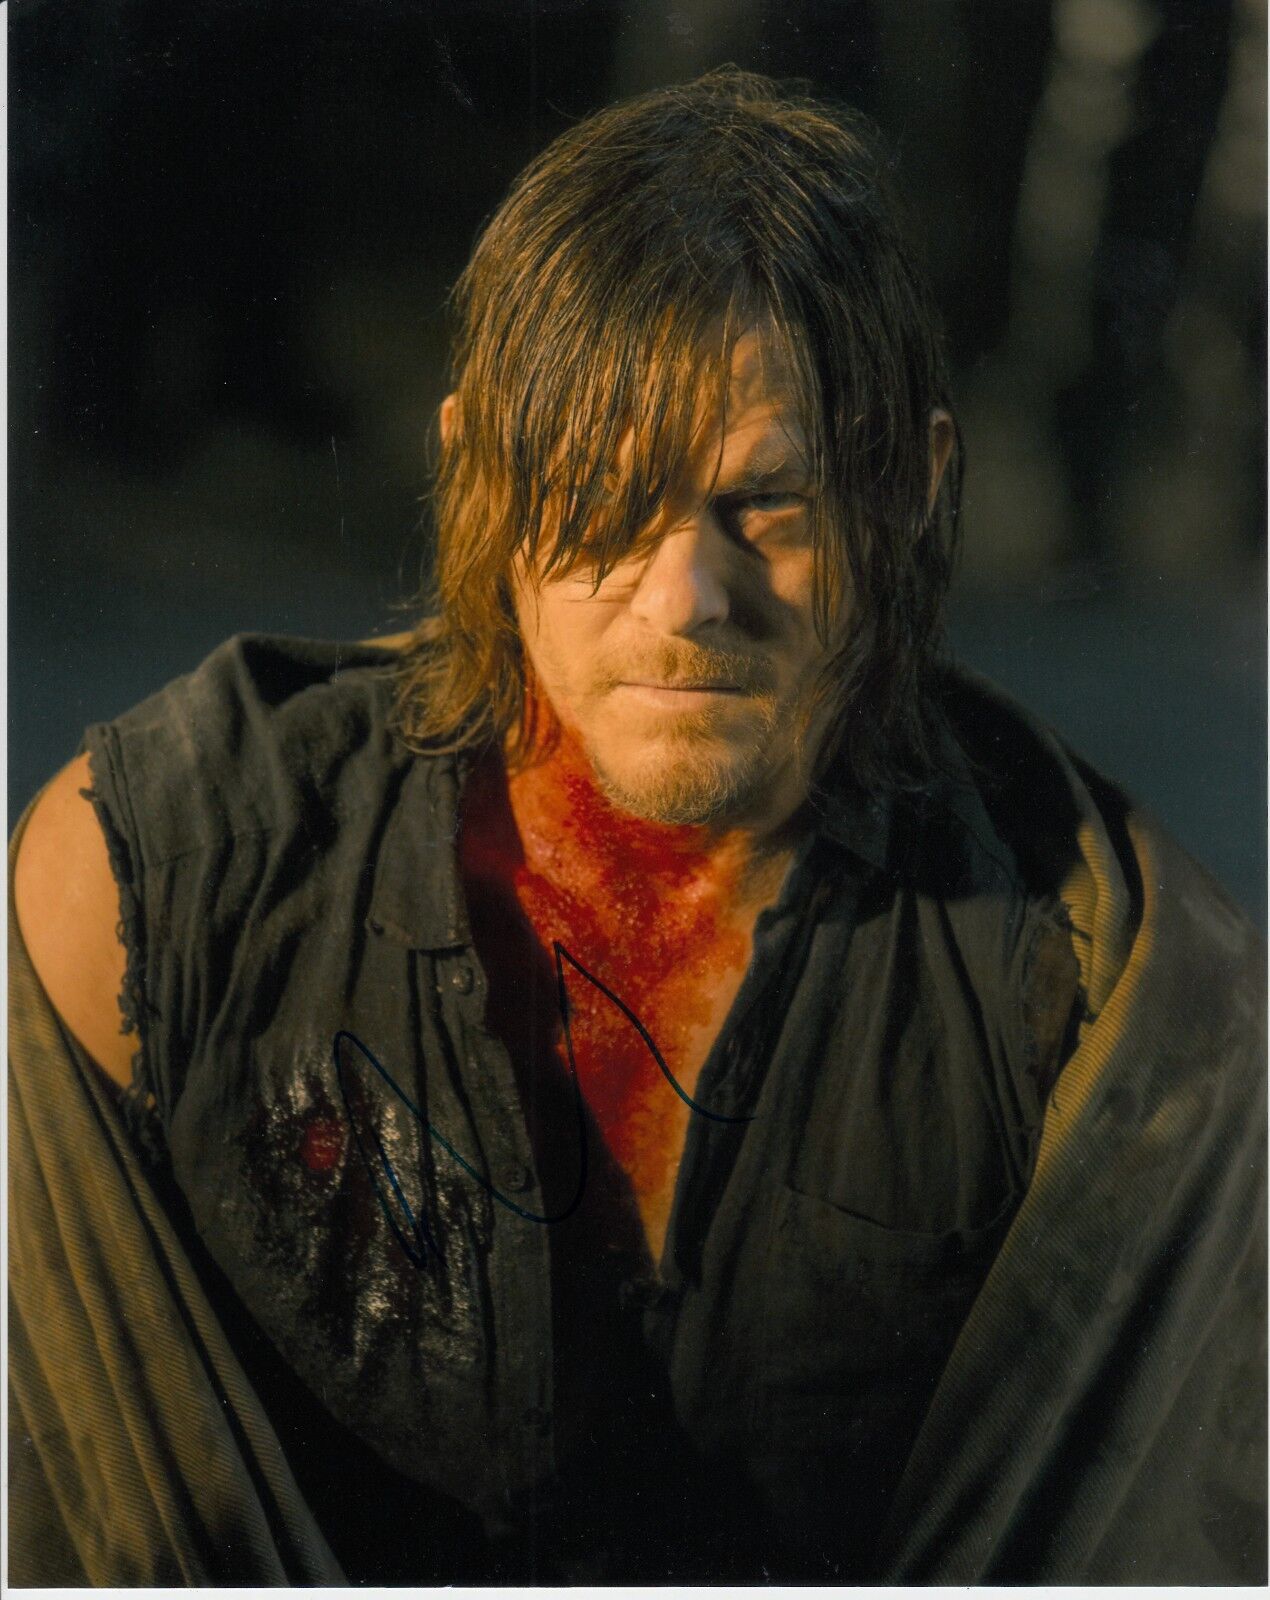 NORMAN REEDUS SIGNED THE WALKING DEAD Photo Poster painting UACC REG 242 (1)